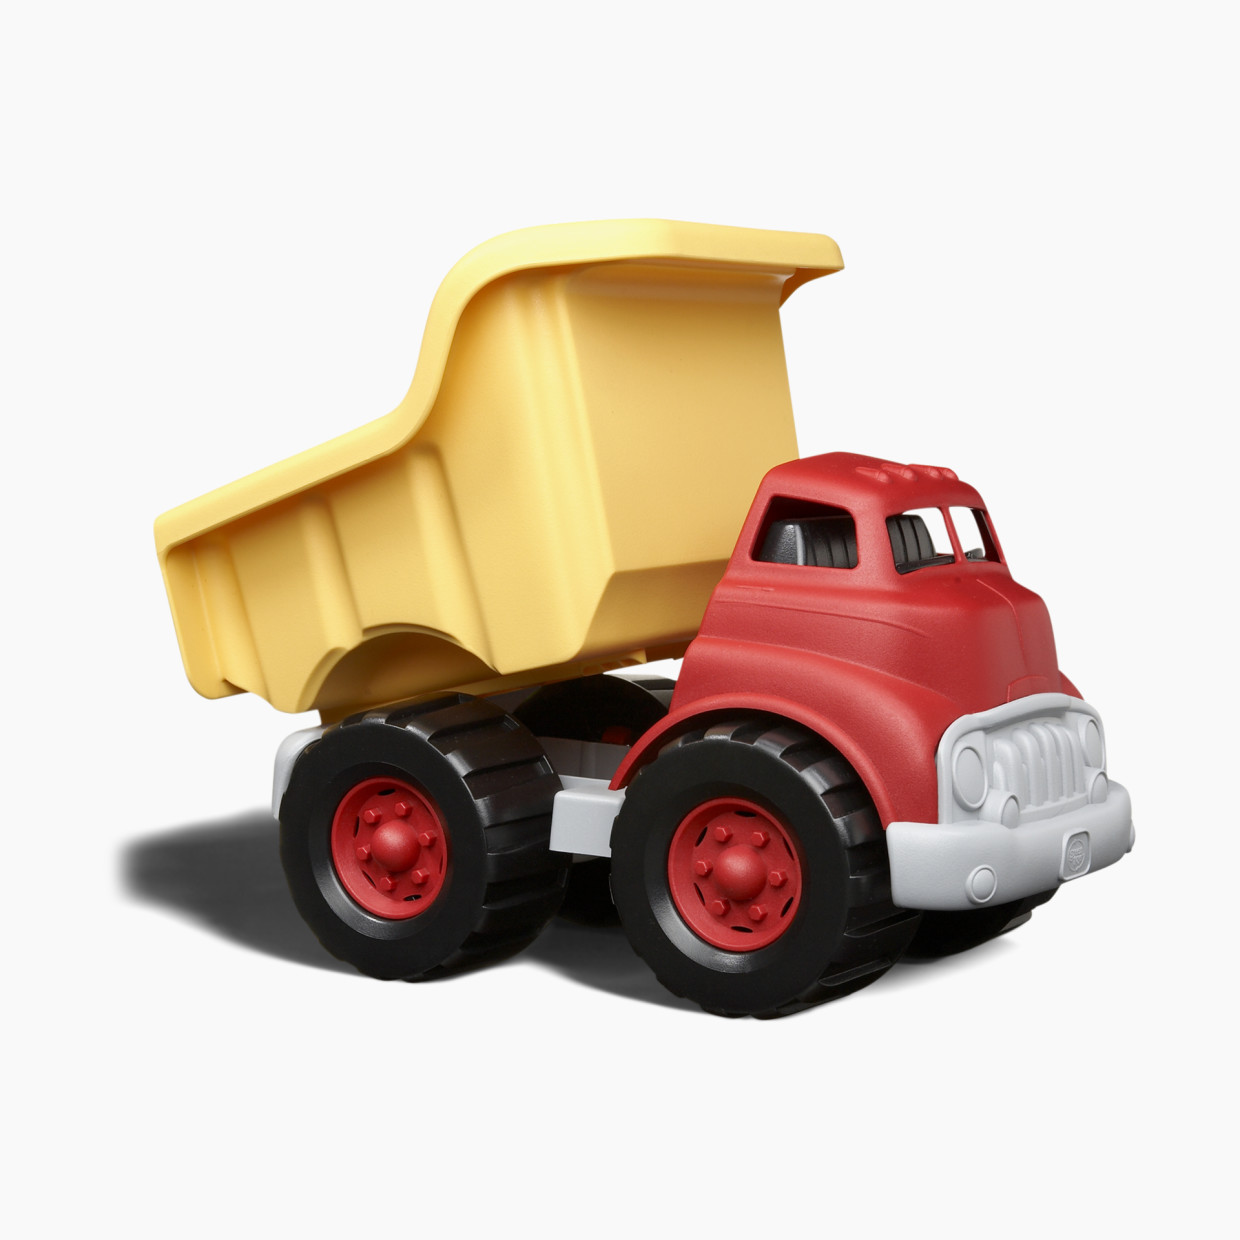 Green Toys Recycled Plastic Dump Truck - Red.